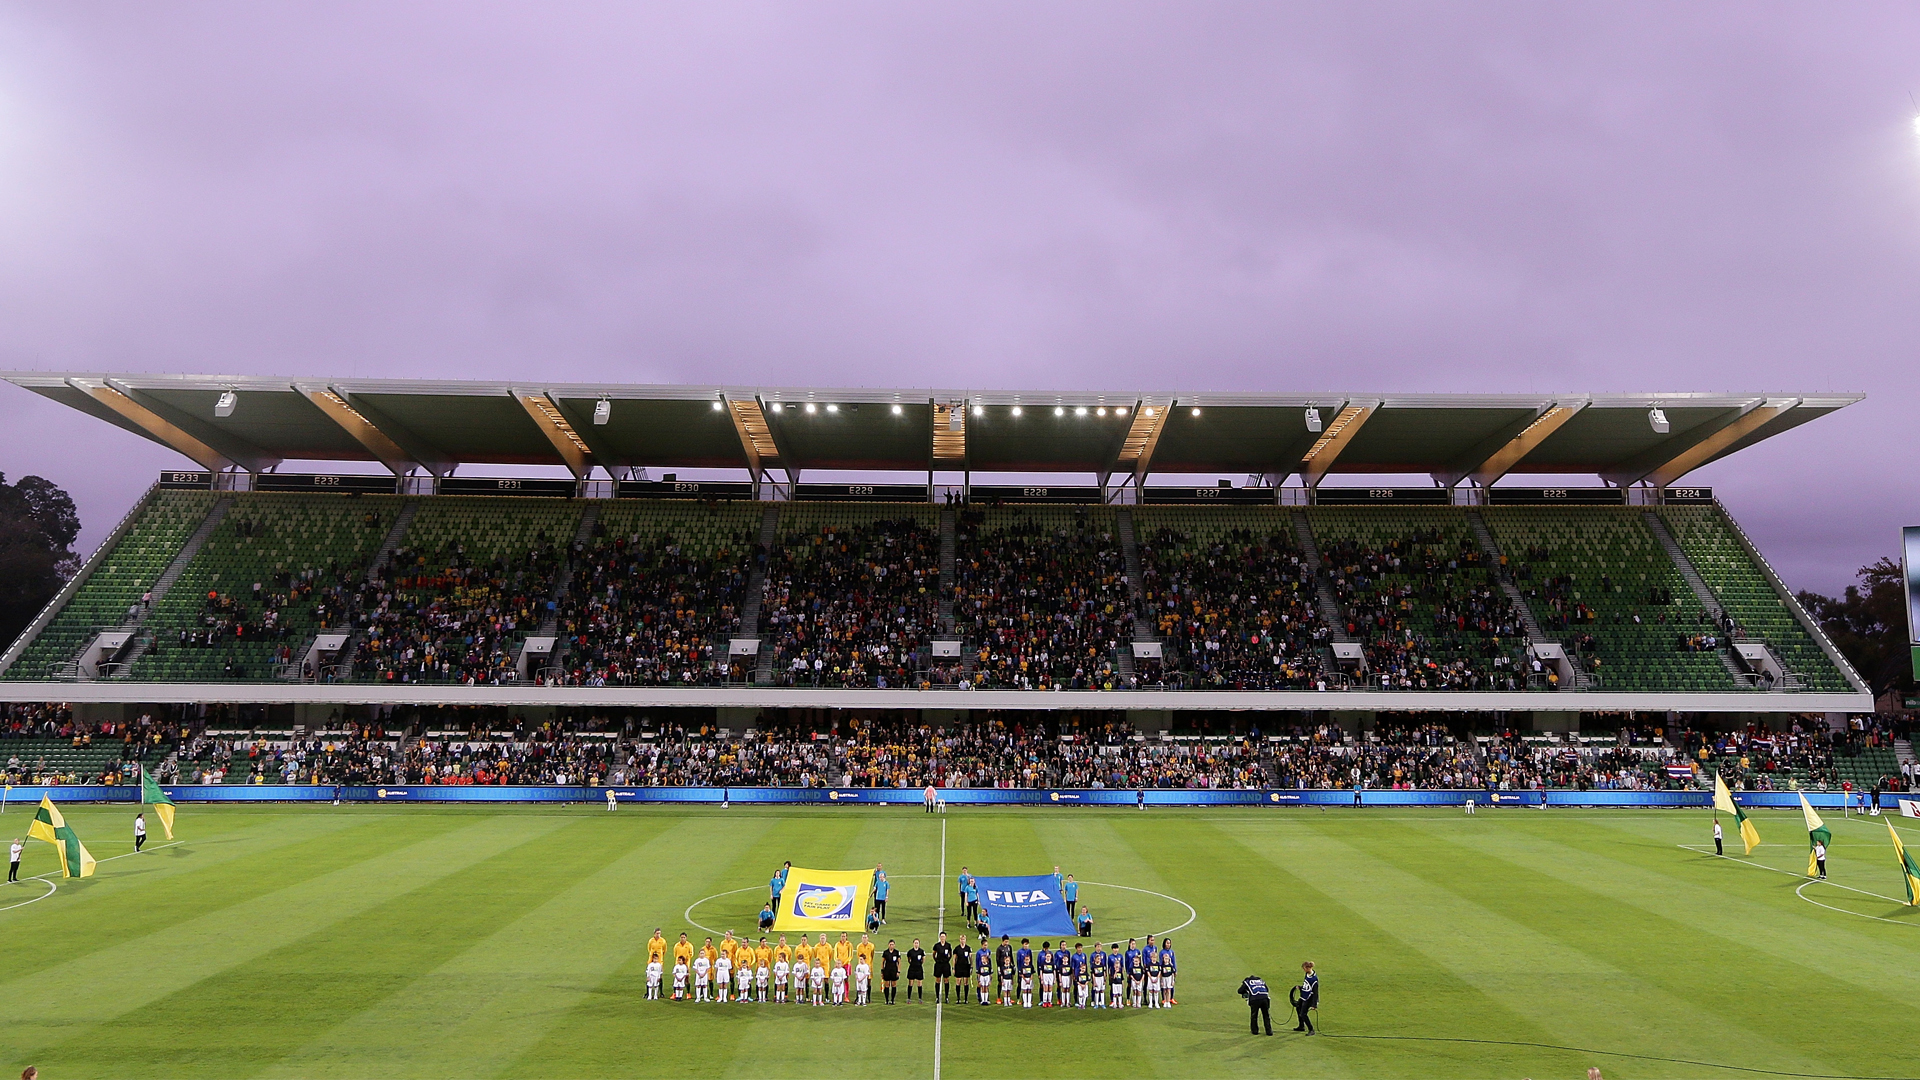 The teams line up for Anthems during the International Friendly Match between the Australian Matildas and Thailand at NIB Stadium on March 26, 2018 in Perth, Australia. (Photo by Will Russell/Getty Images)